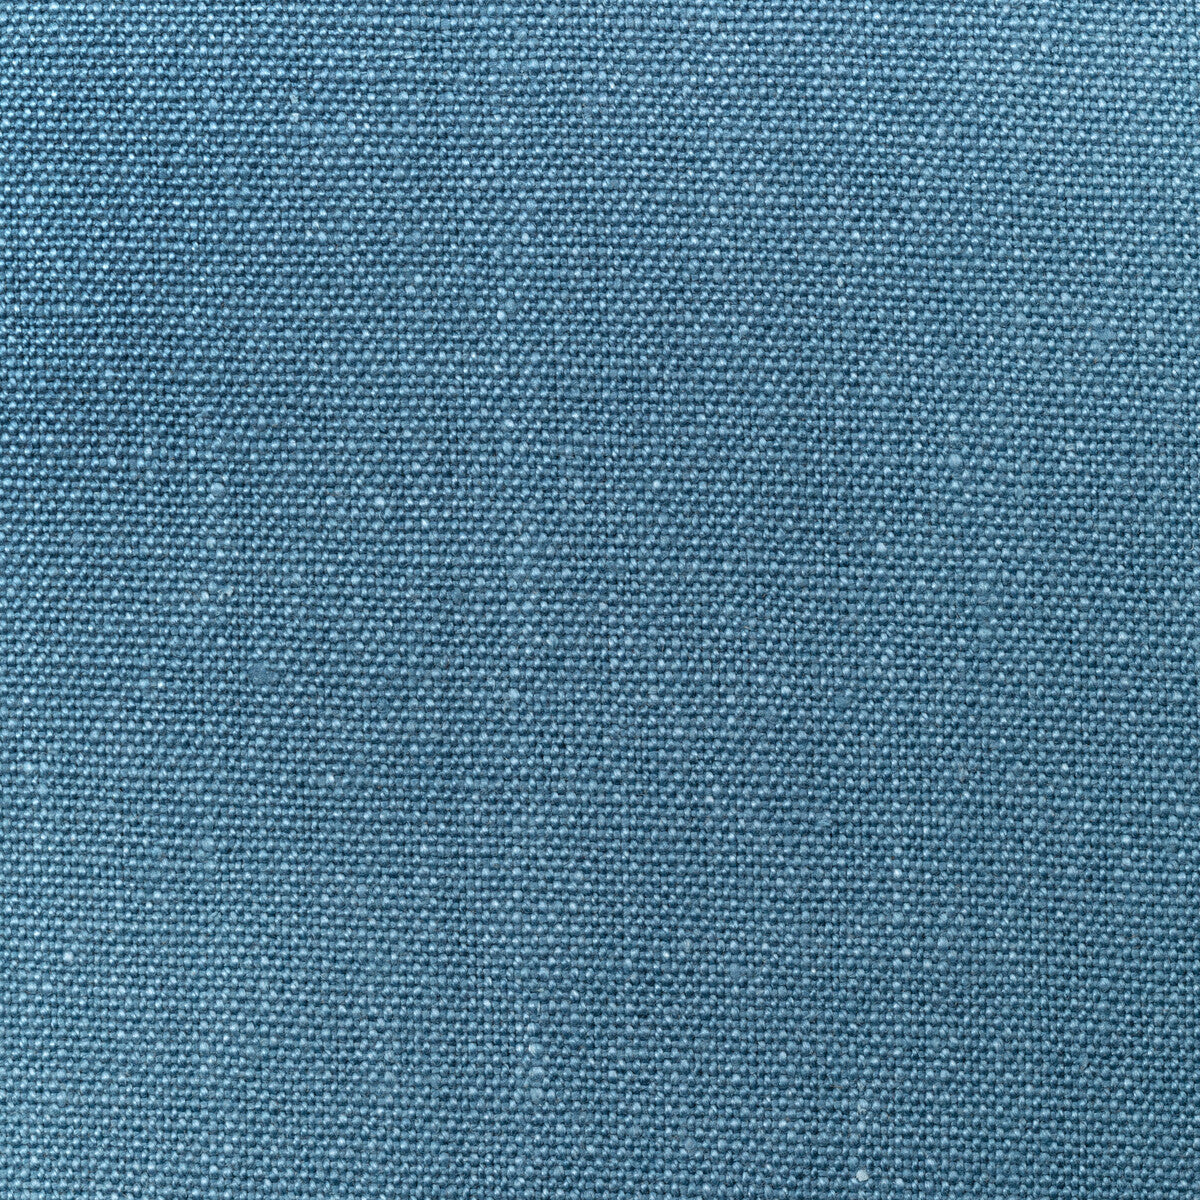 Knightbridge fabric in mid blue color - pattern PF50199.660.0 - by Baker Lifestyle in the Perfect Plains collection